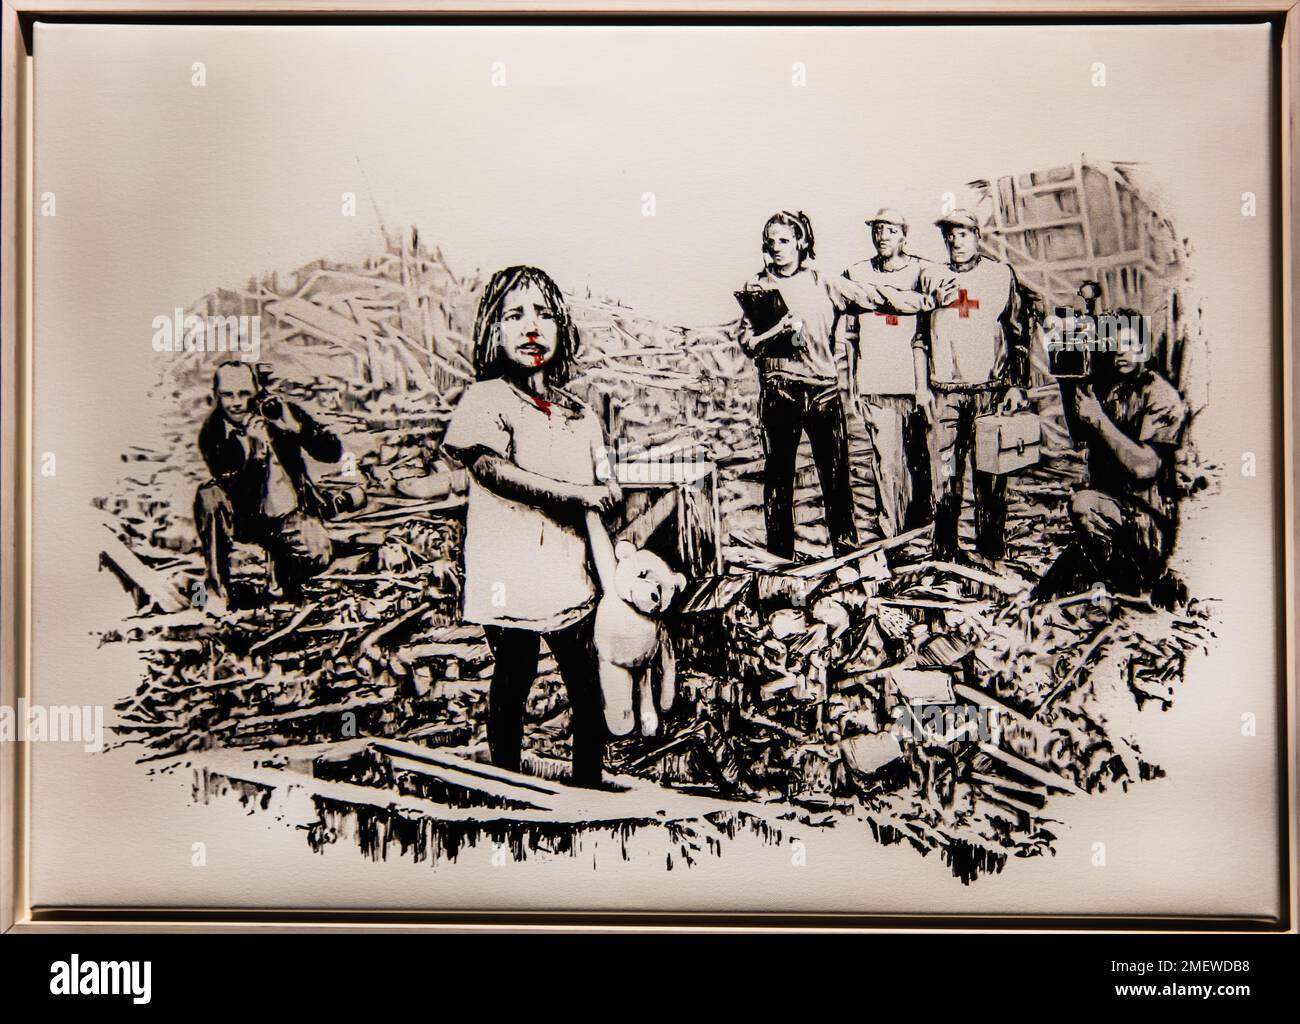 Media Canvas, destructive power of wars and the hypocrisy of the media, 2006, Banksy, exhibition about the street artist, Muelheim, Germany Stock Photo